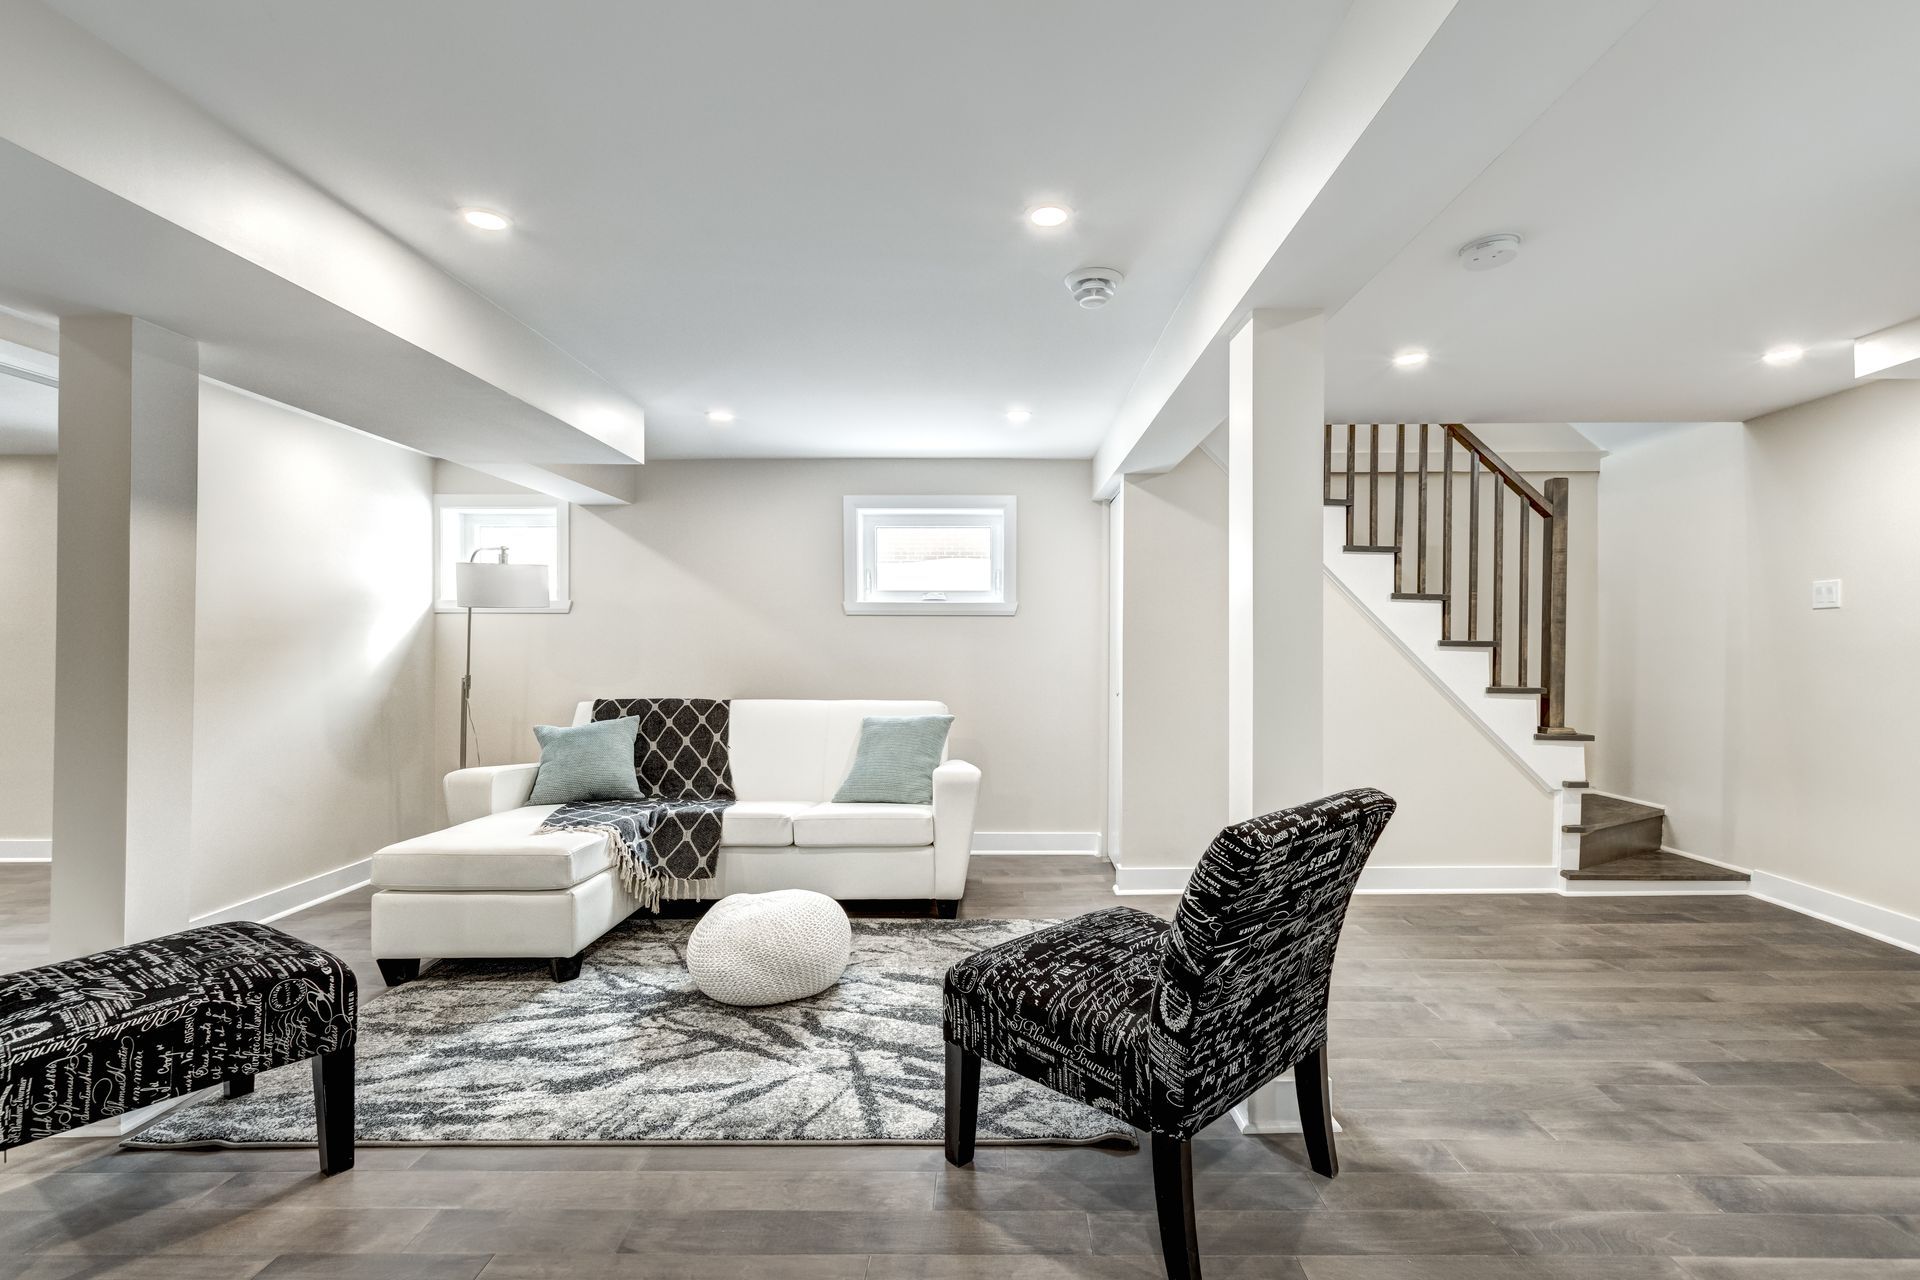 nicely renovated basement